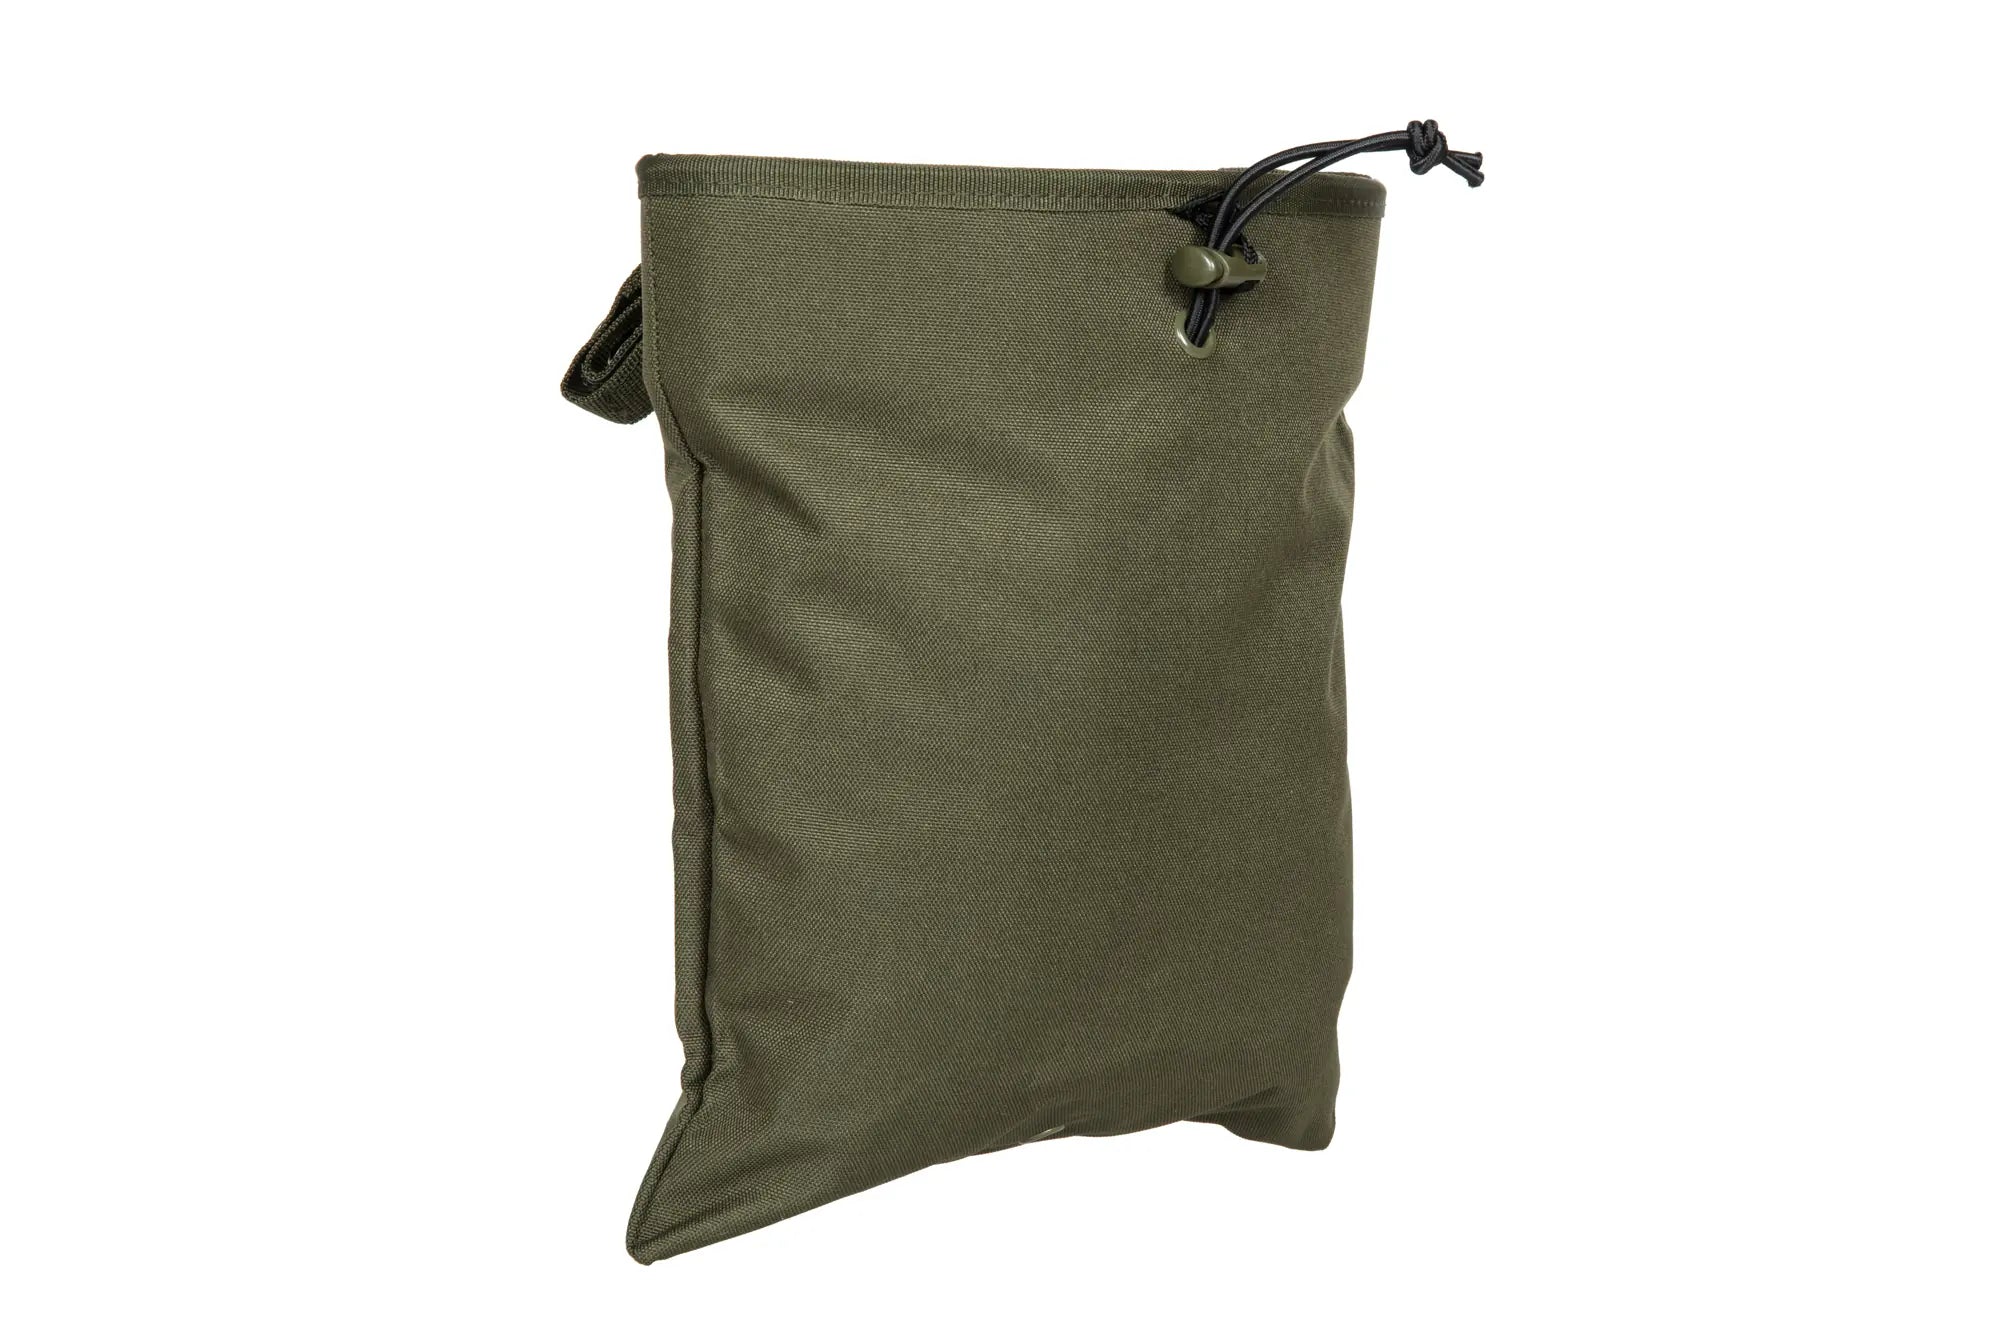 Dump Pouch for Magazines - Olive-2